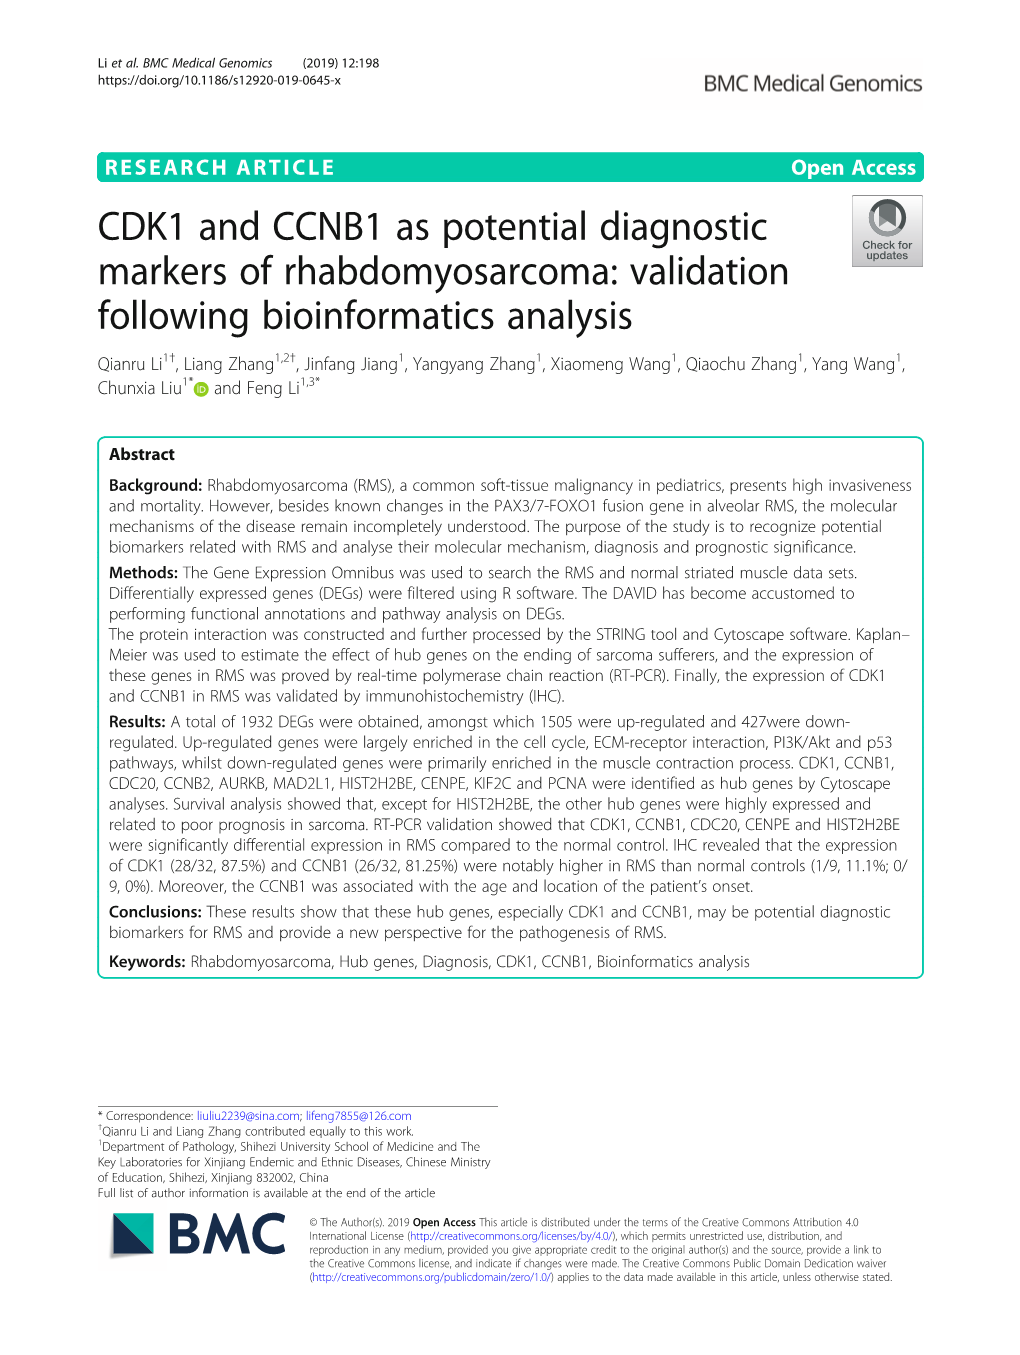 CDK1 and CCNB1 As Potential Diagnostic Markers Of